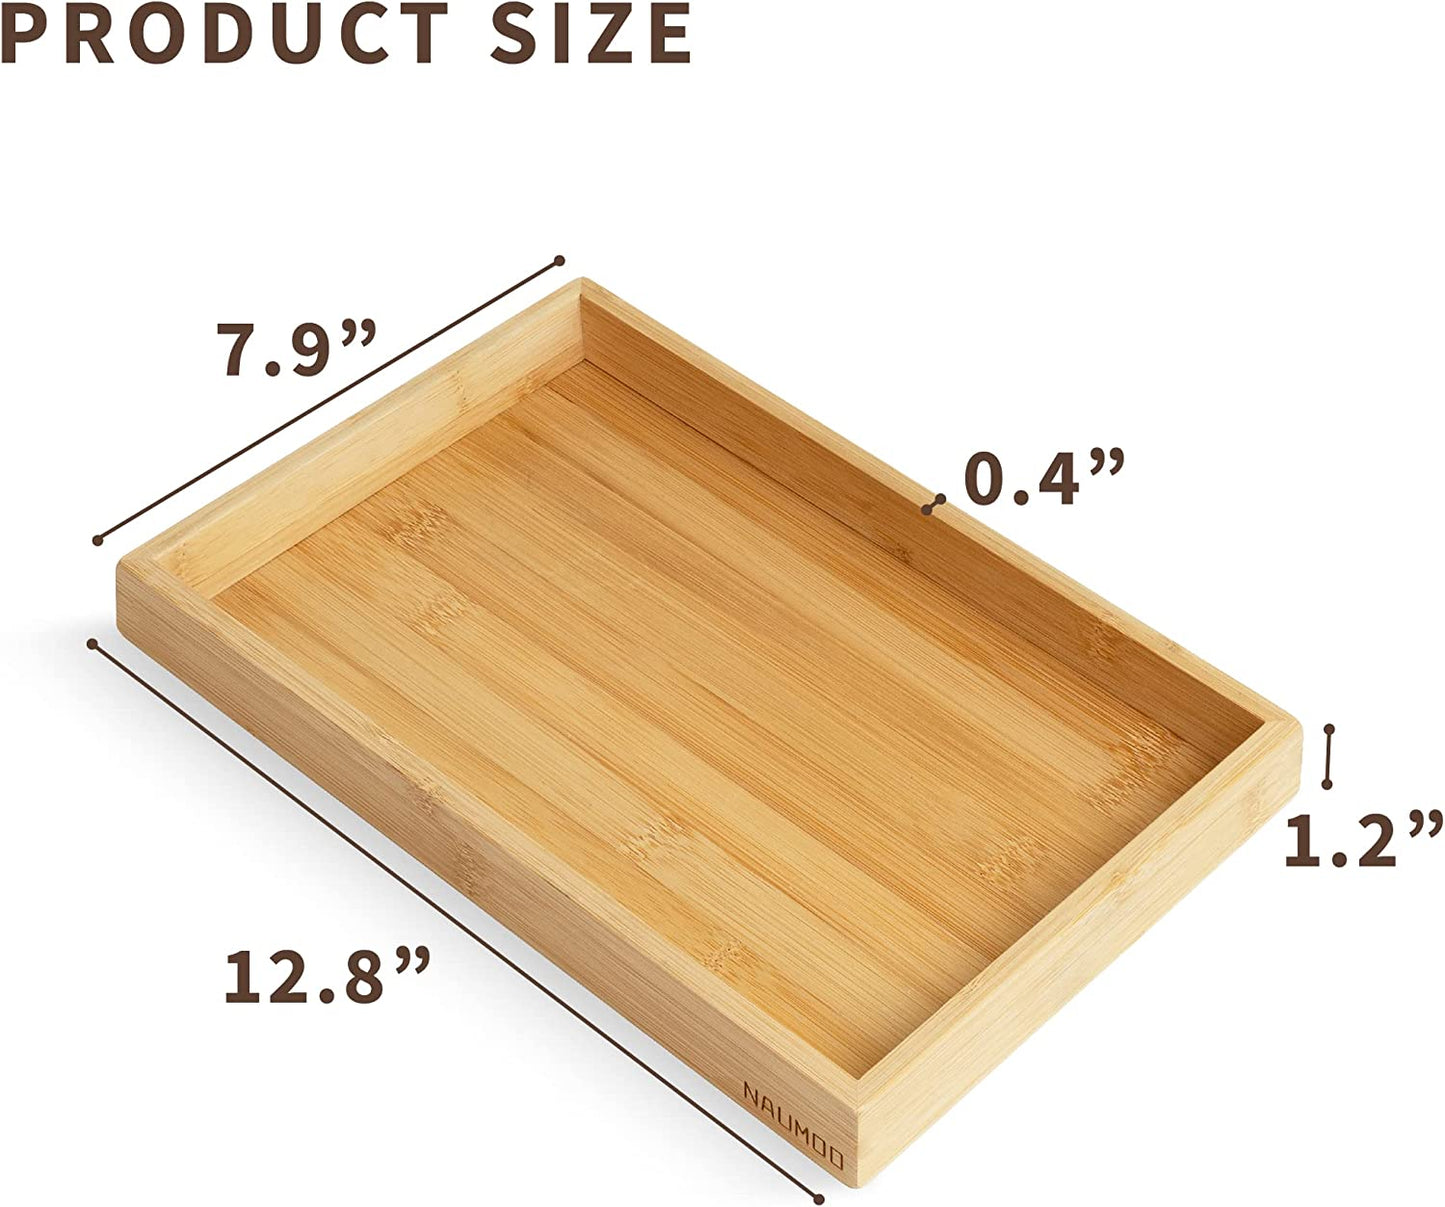 Bamboo Bathroom Counter Tray - Slip-Resistant - Large Vanity Trays for Dresser Top - Wooden Organizer for Perfume, Cologne - Decorative Holder for Skincare